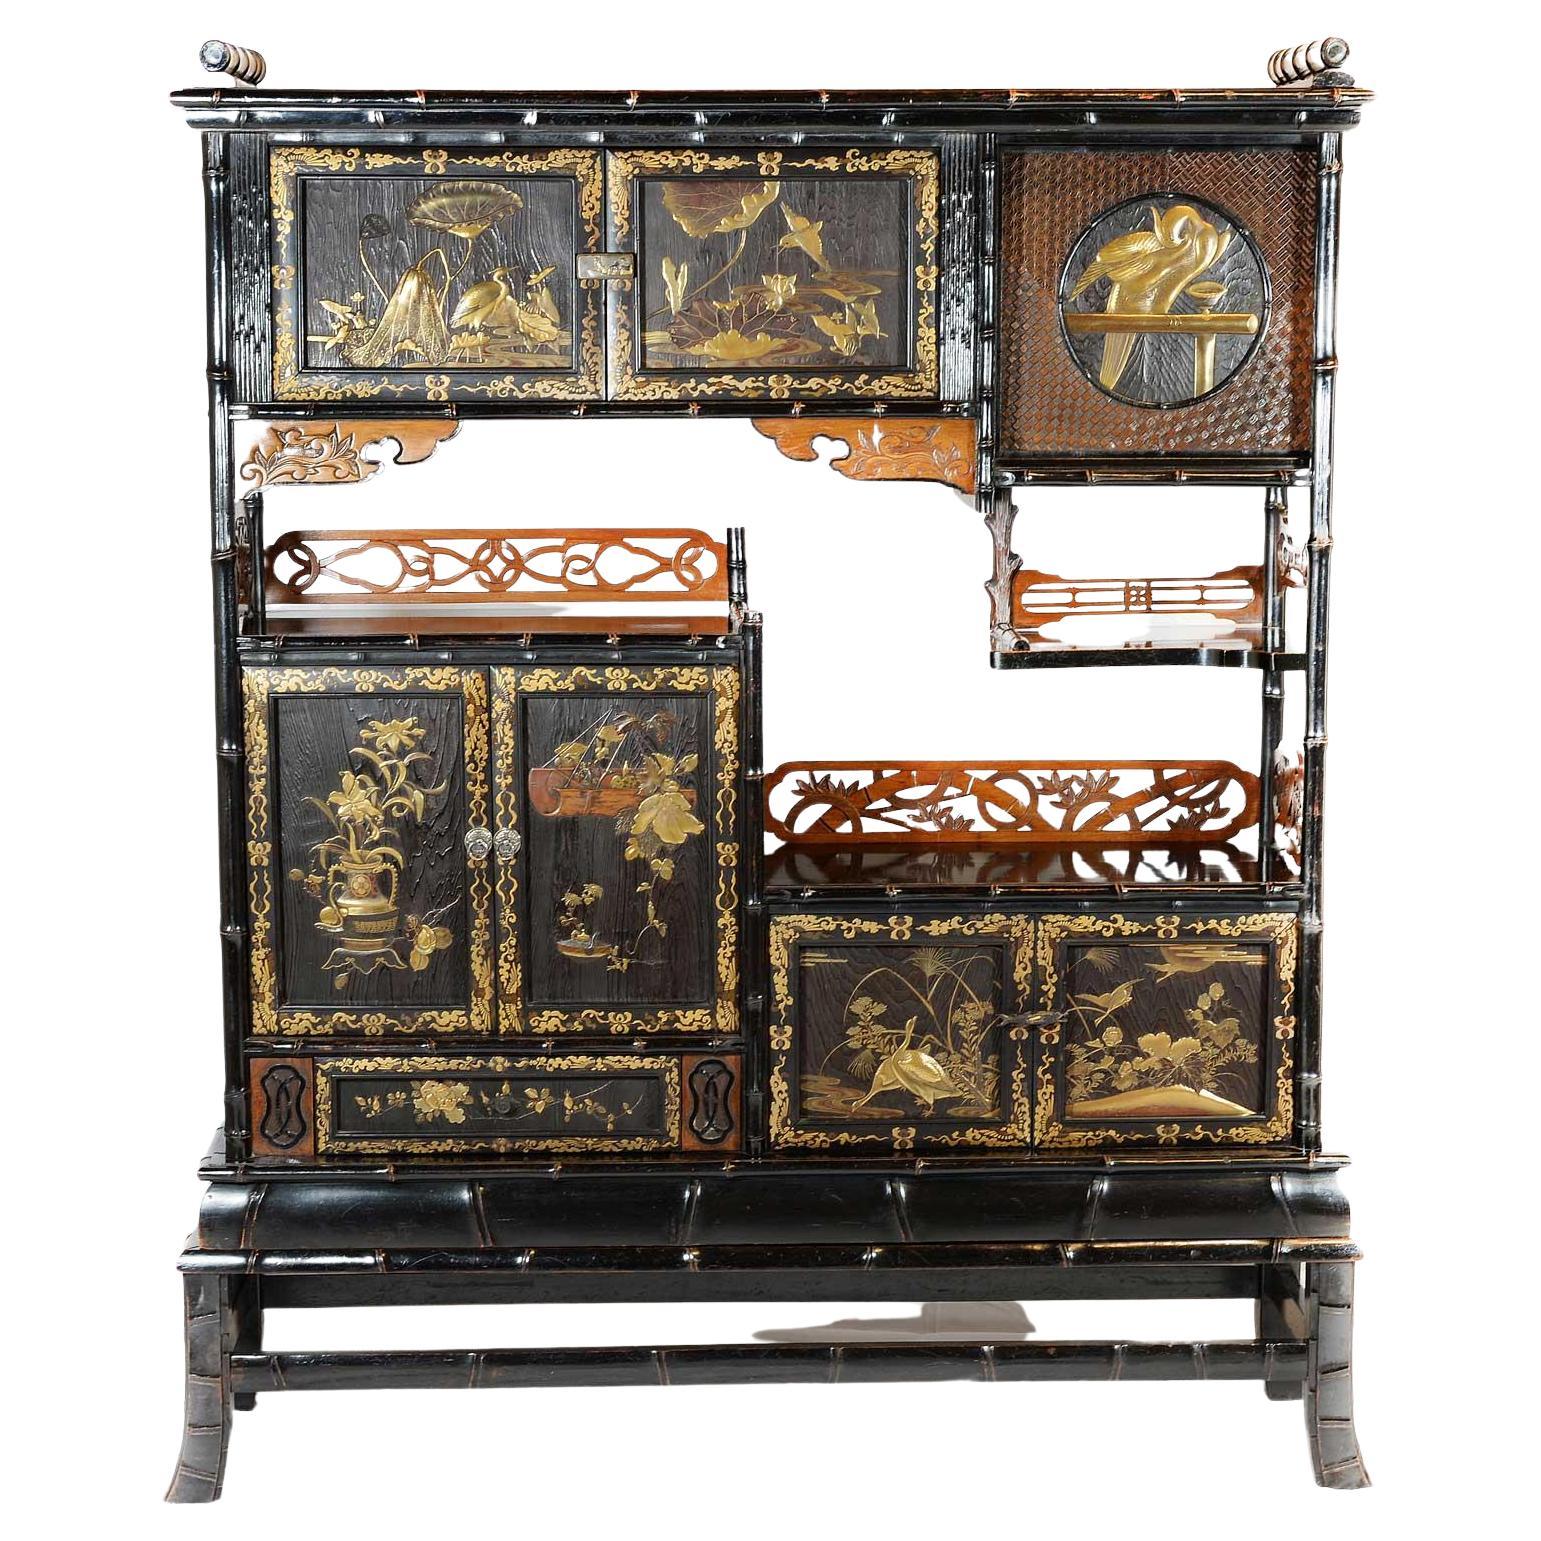 Delightful Japanese Bamboo Form Gold Lacquer Kazaridana Cabinet For Sale